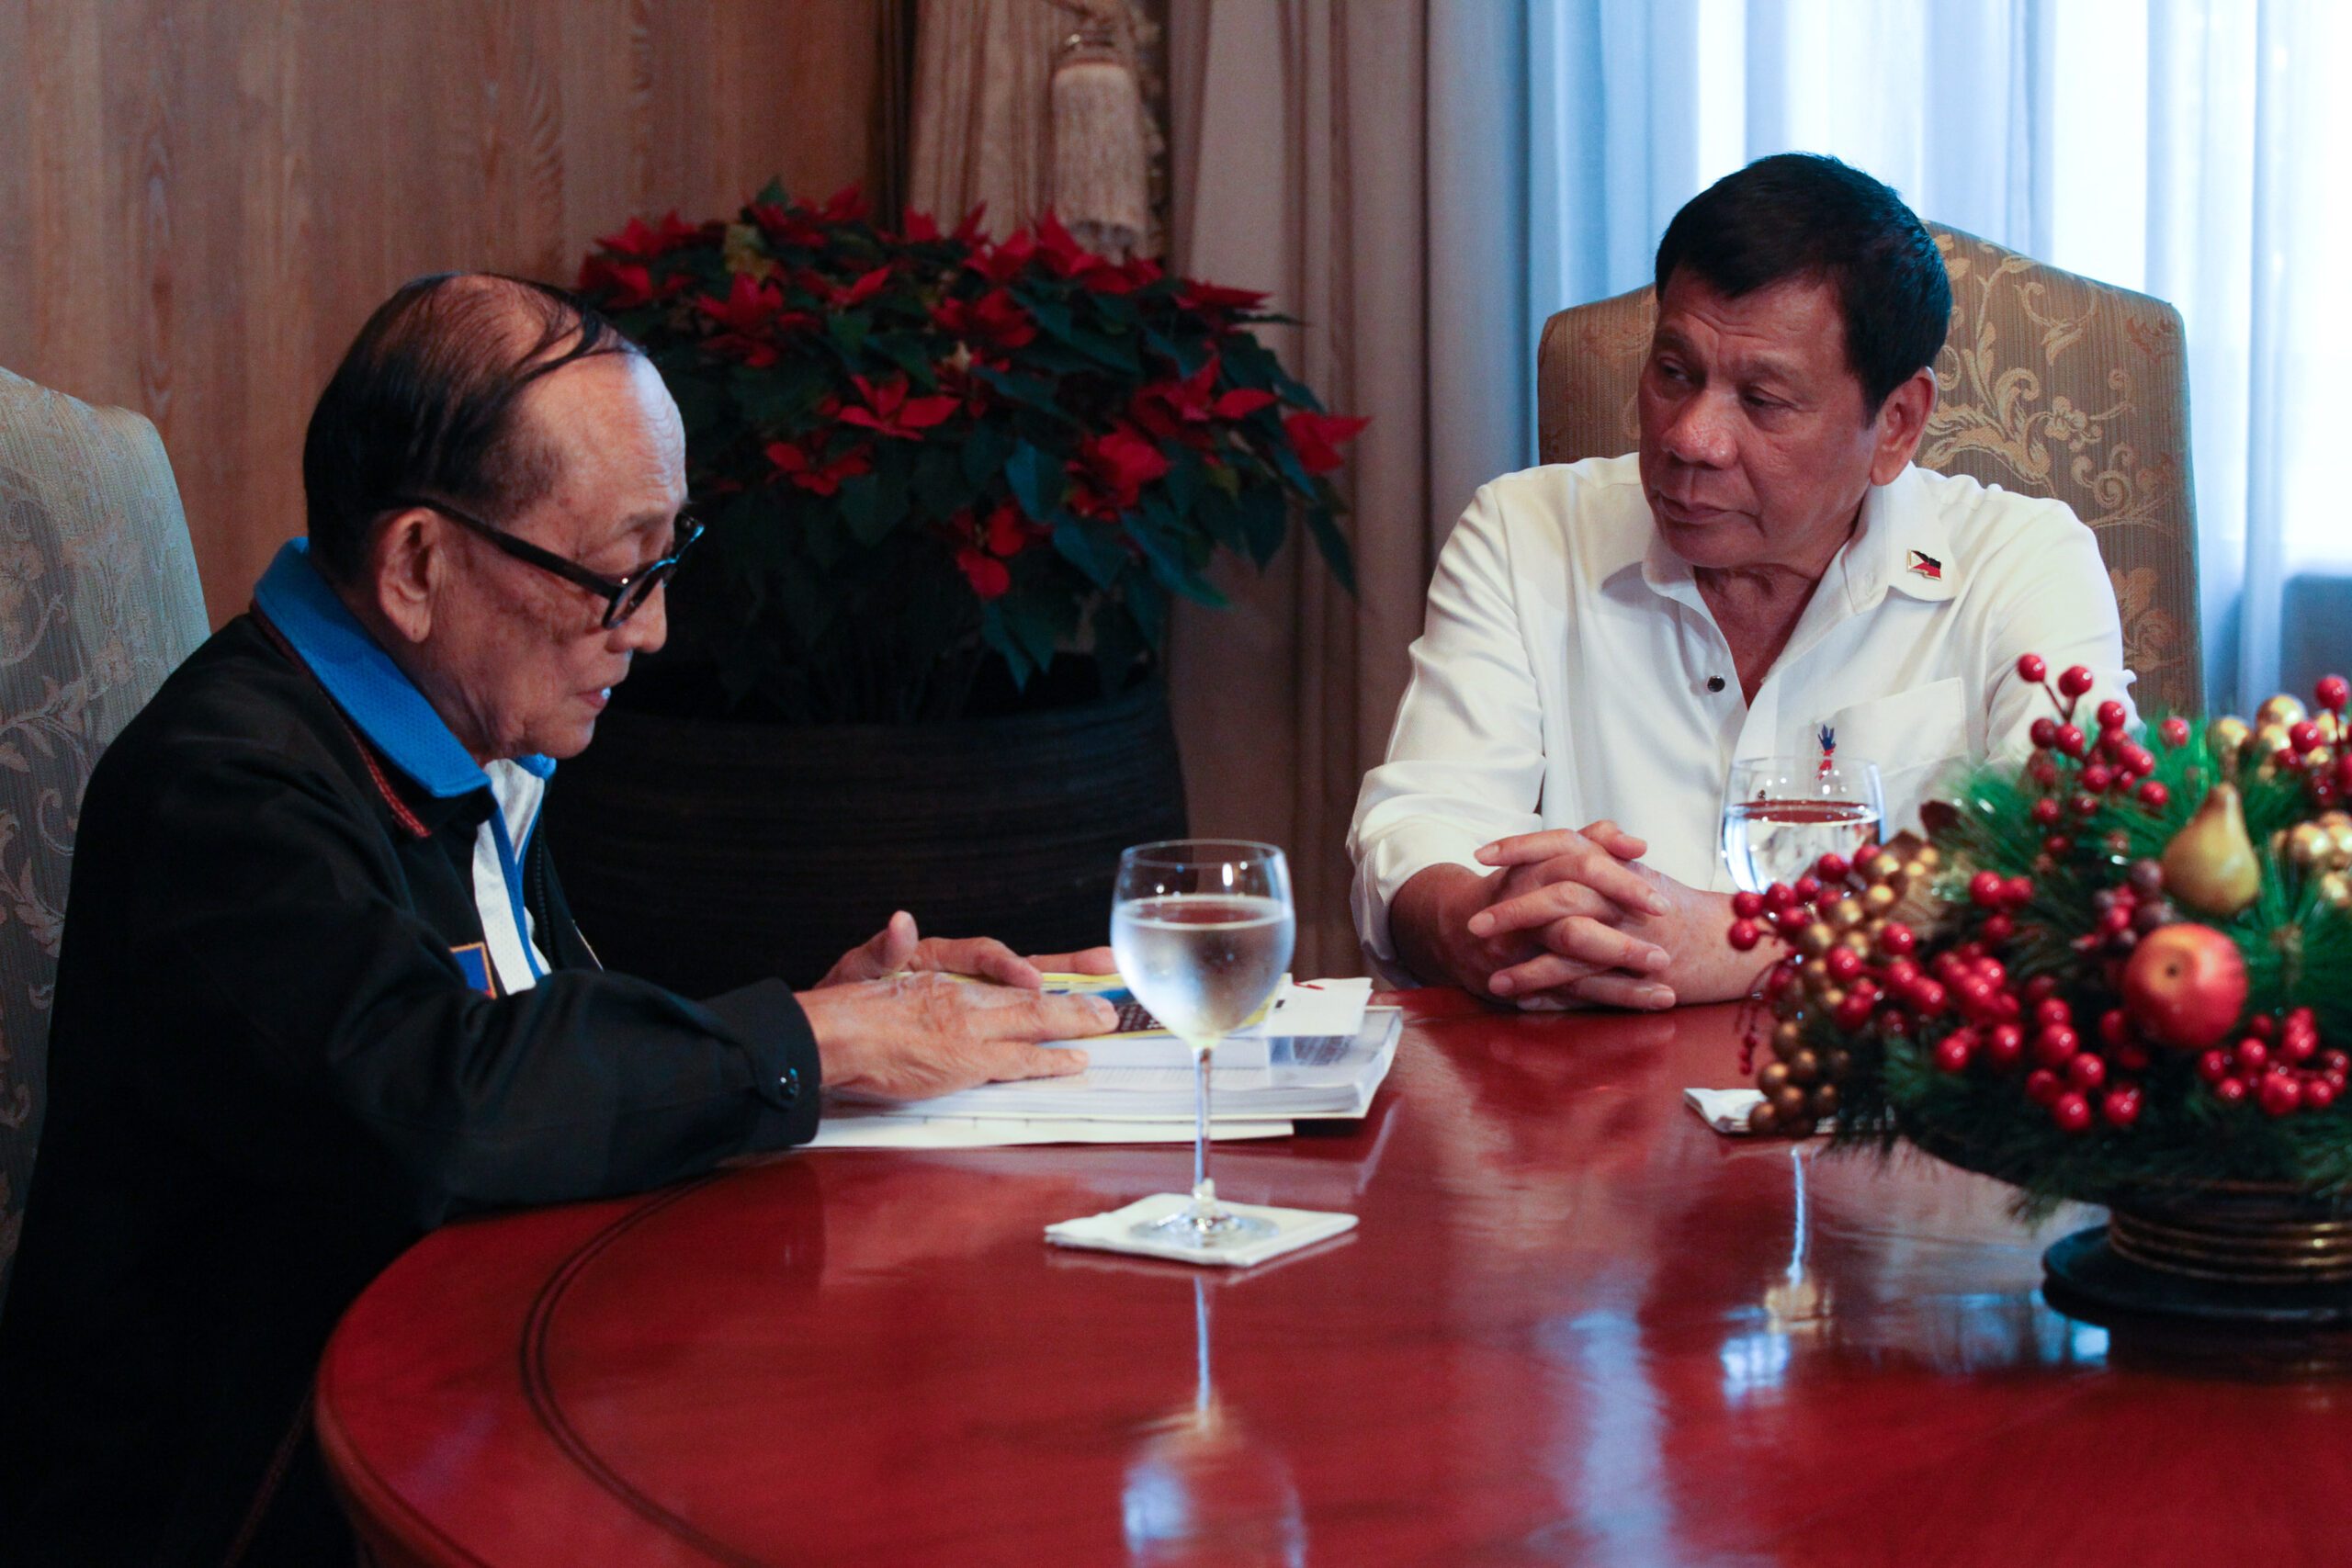 Duterte, Ramos have ‘very warm’ meeting in Palace